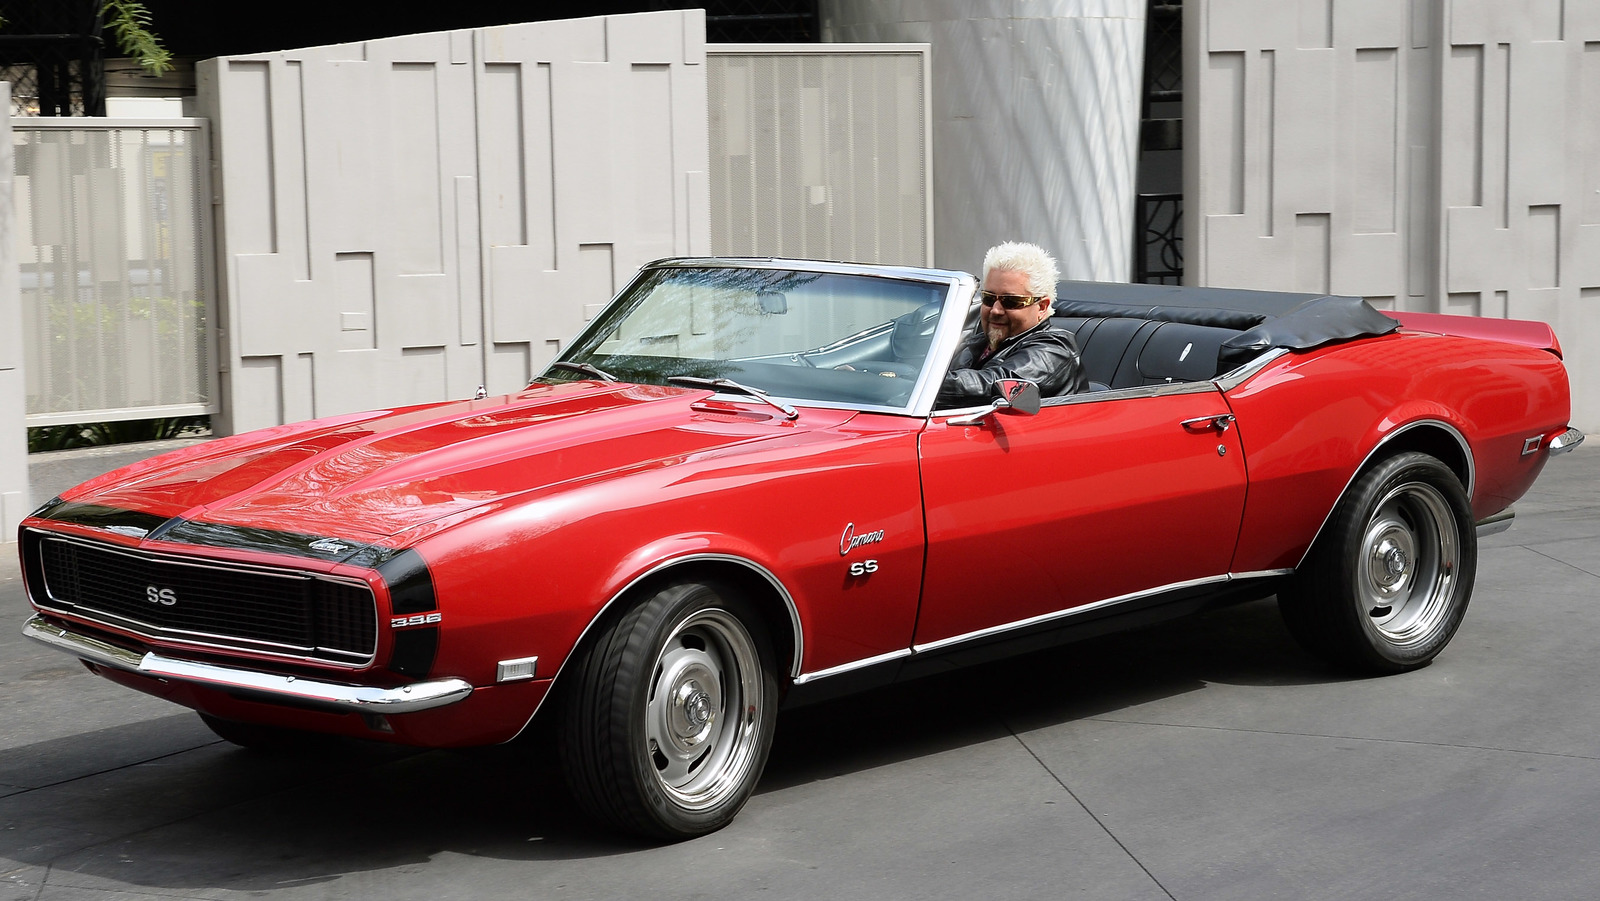 What You Didn't Know About Guy Fieri's Famous Car